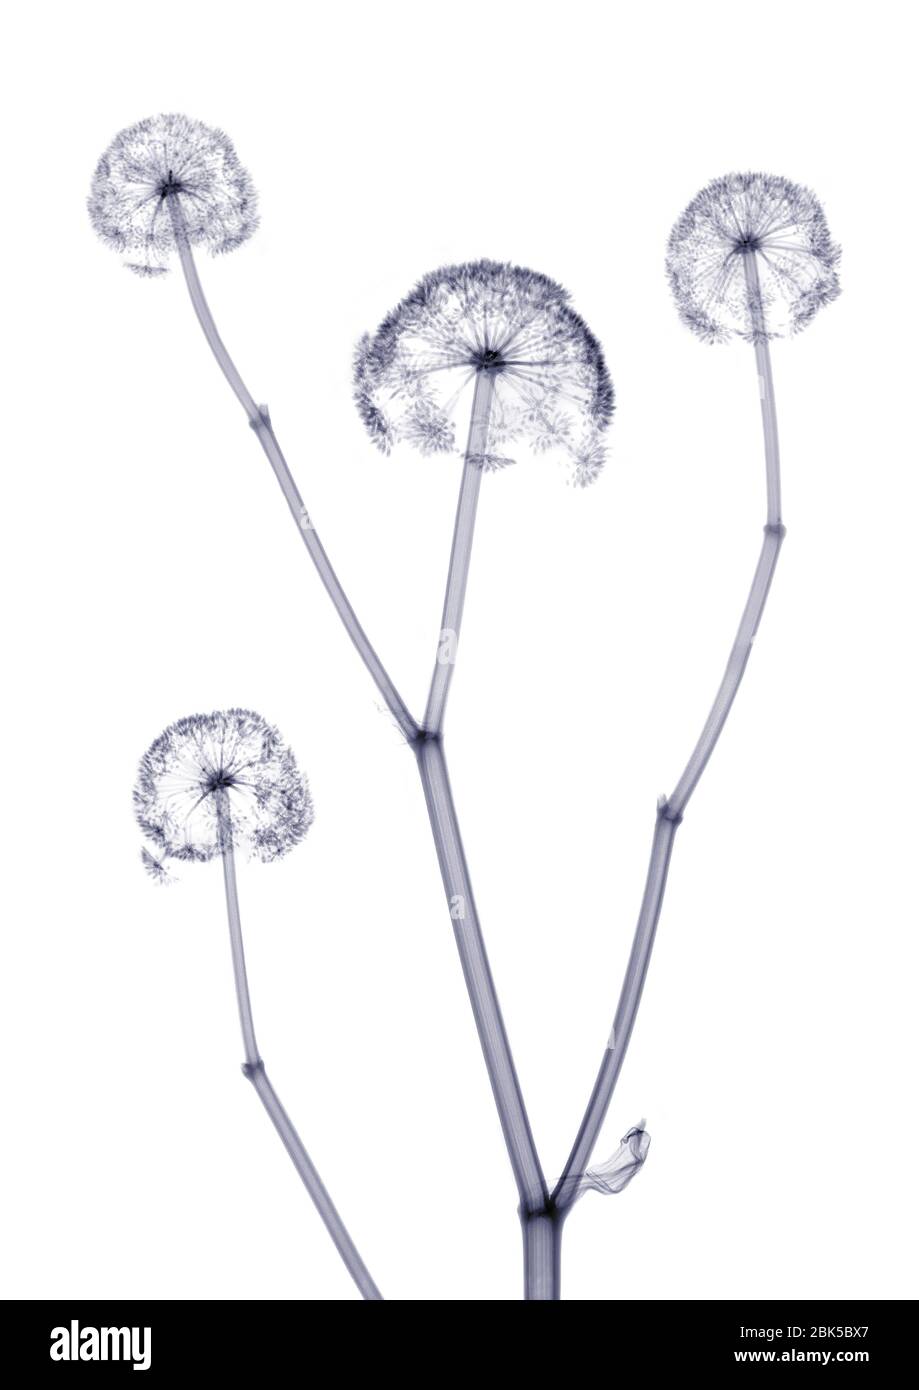 Four delicate flowers on a stem, X-ray. Stock Photo